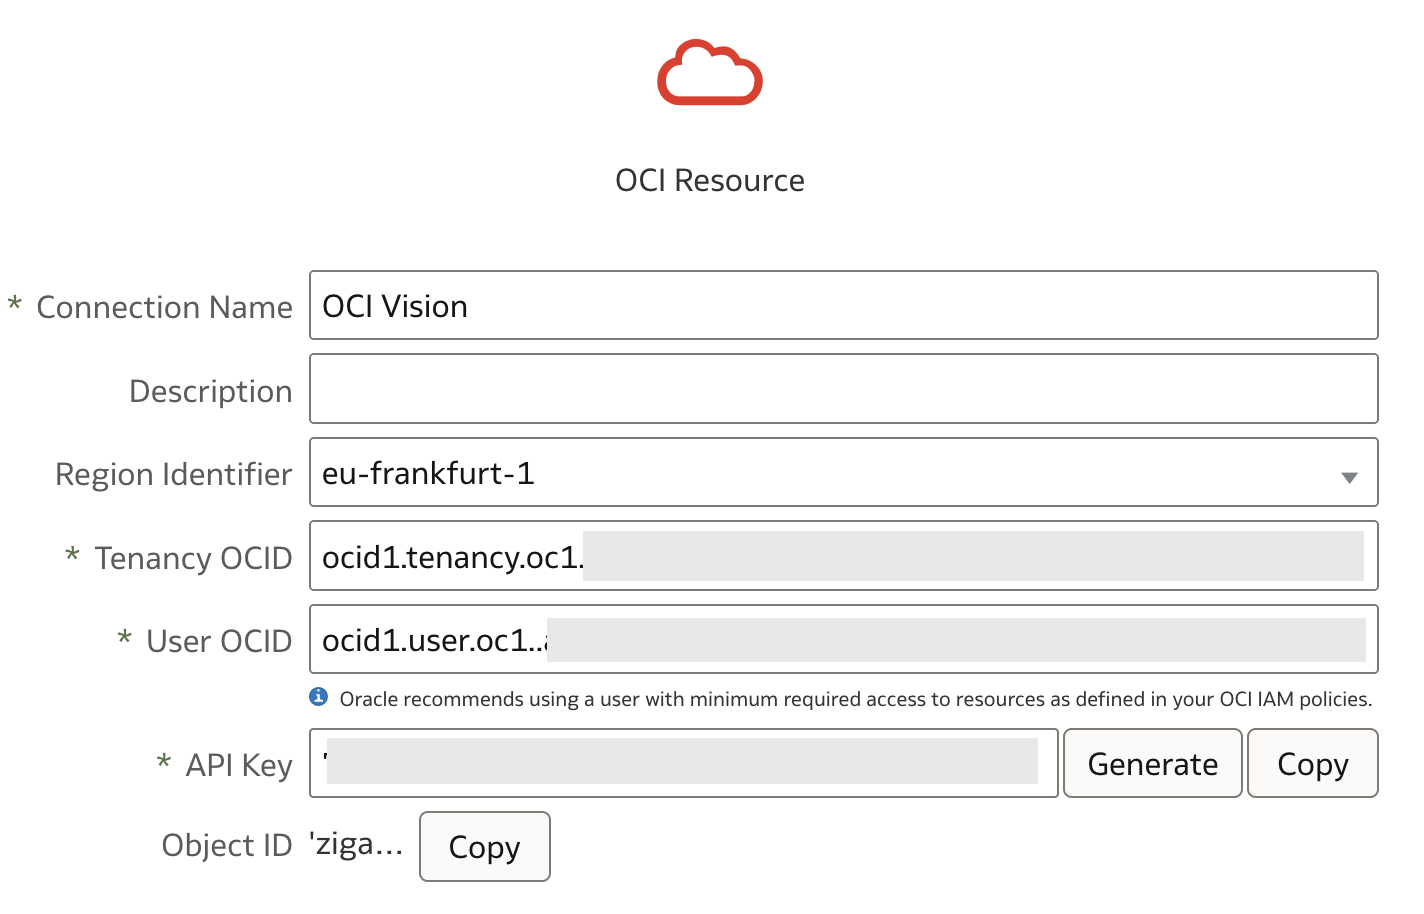 Creating connection to OCI Resource